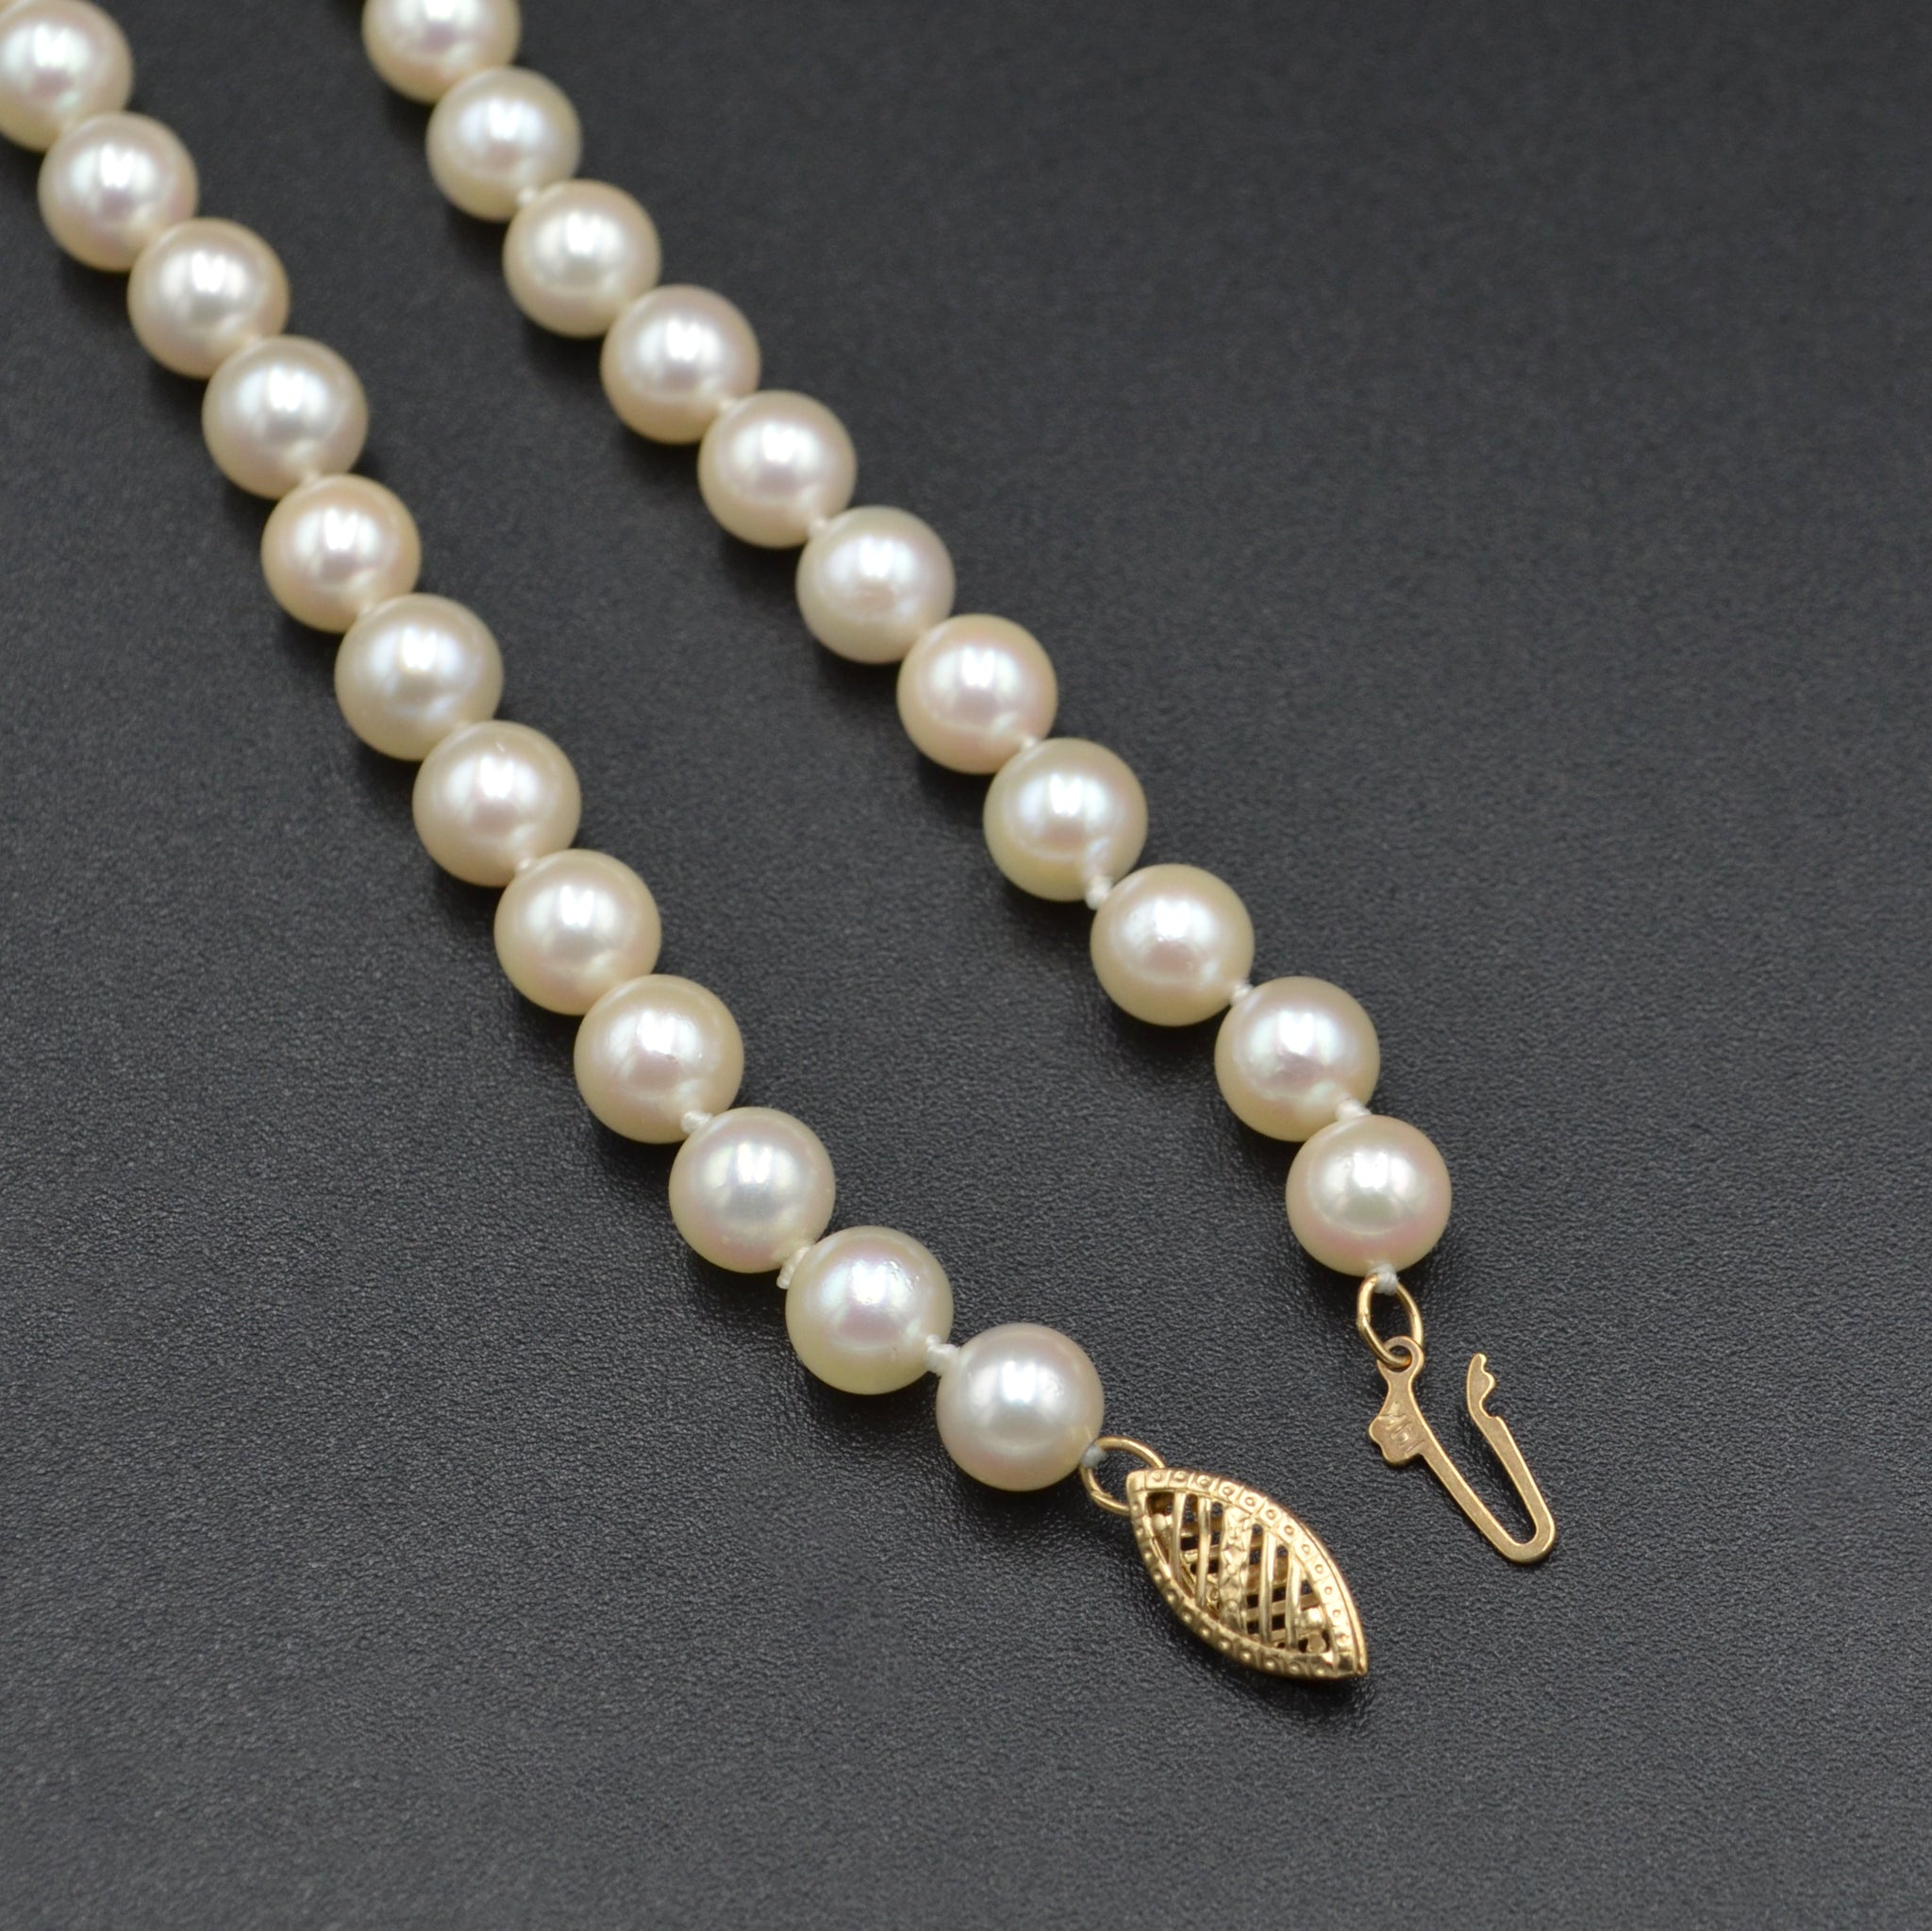 Genuine Pearls Necklace with 14K Gold Clasp White Beads Round 5.7 Mm - Ruby  Lane